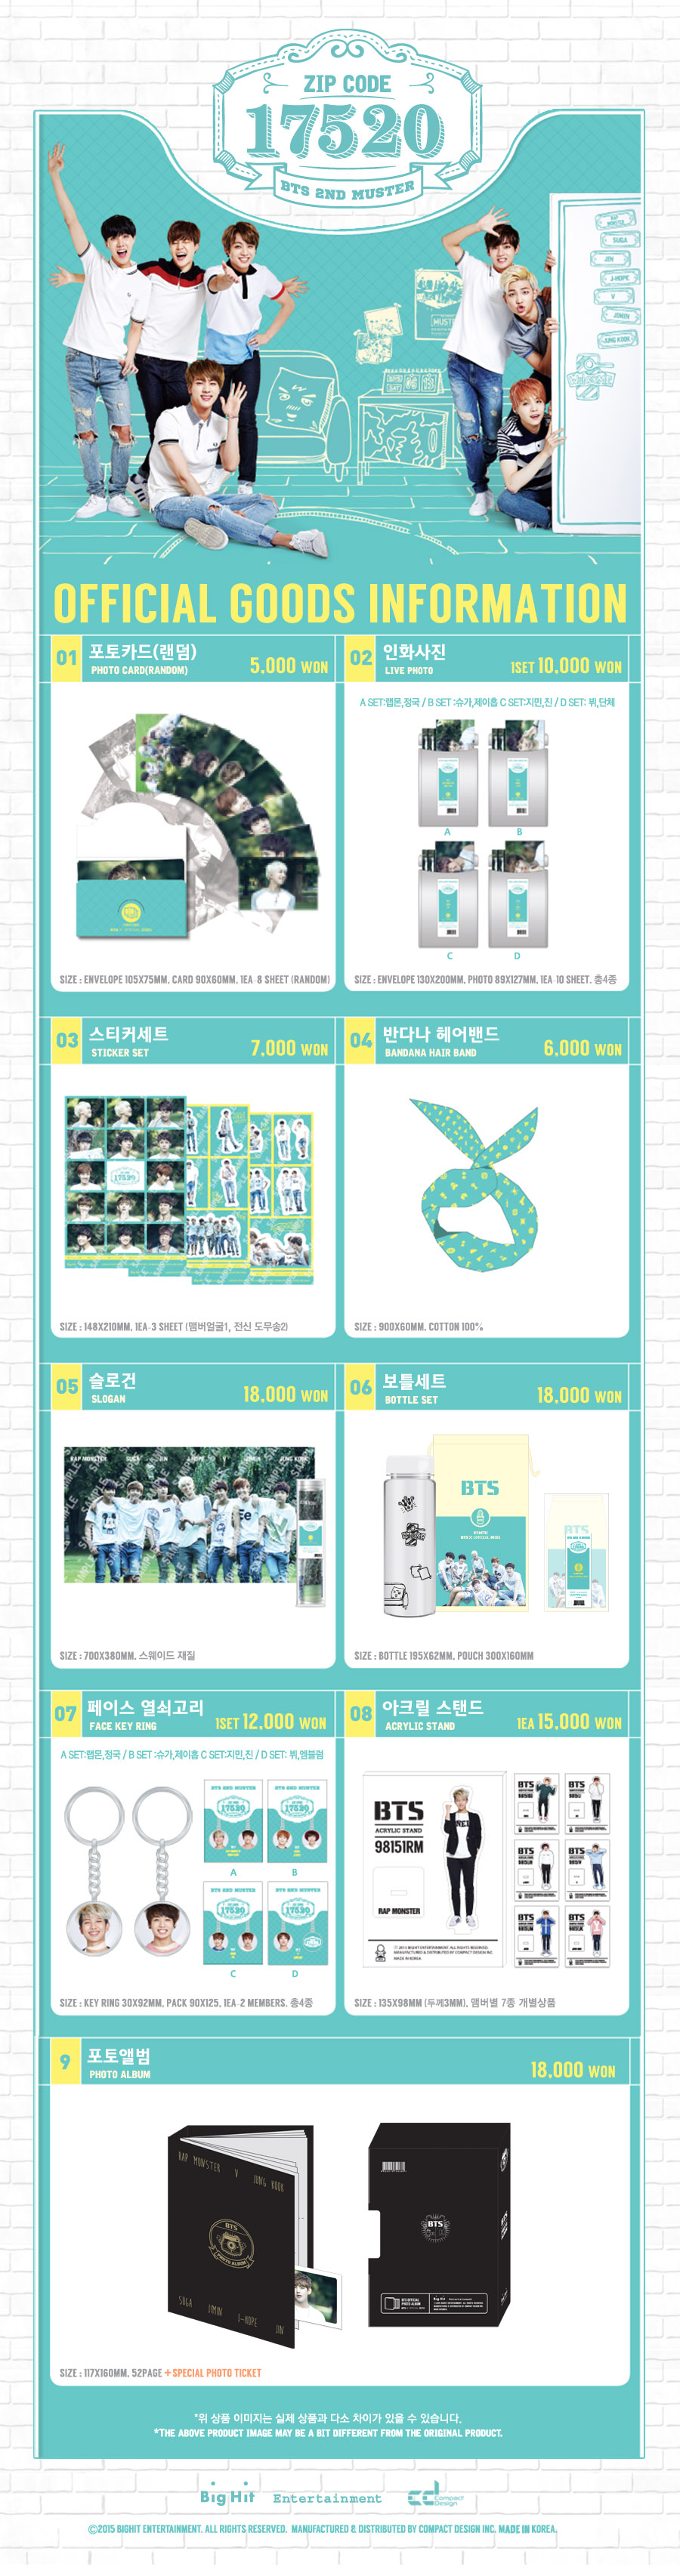 INFO] BTS Muster [ZIP CODE : 17520] Goods will be sold through the 